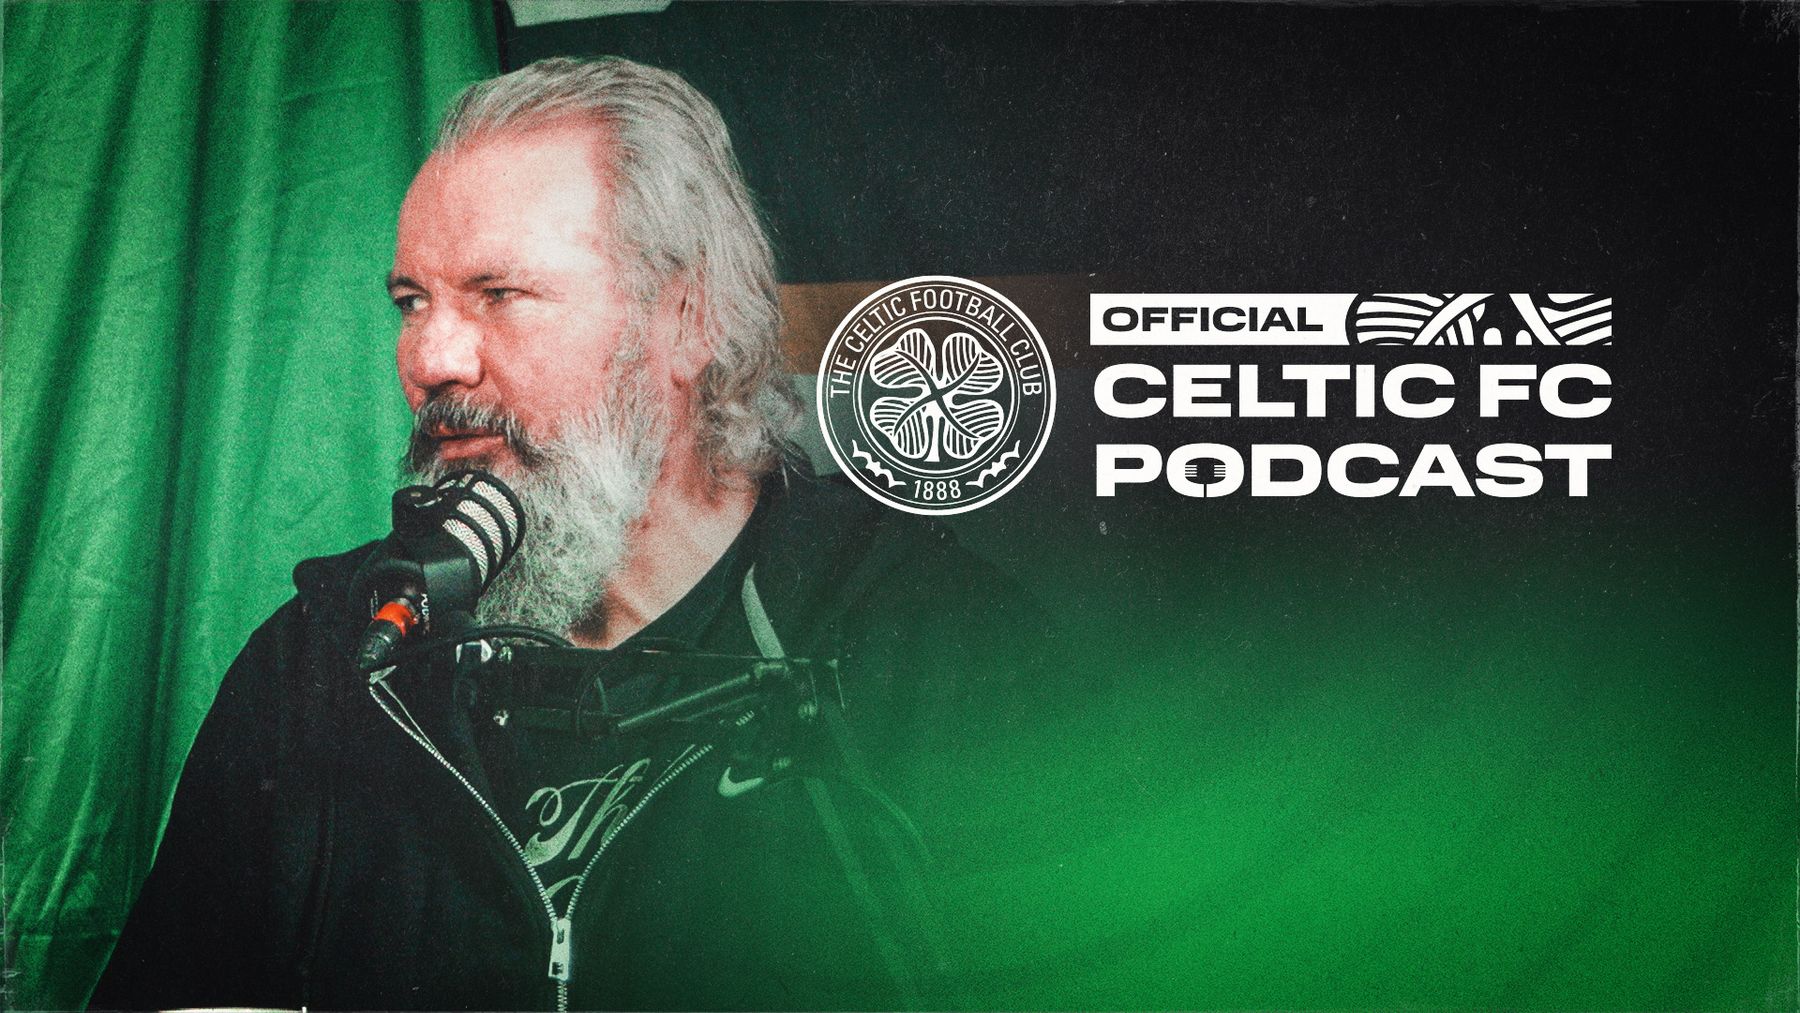 Brian McClair on the Official Celtic FC Podcast